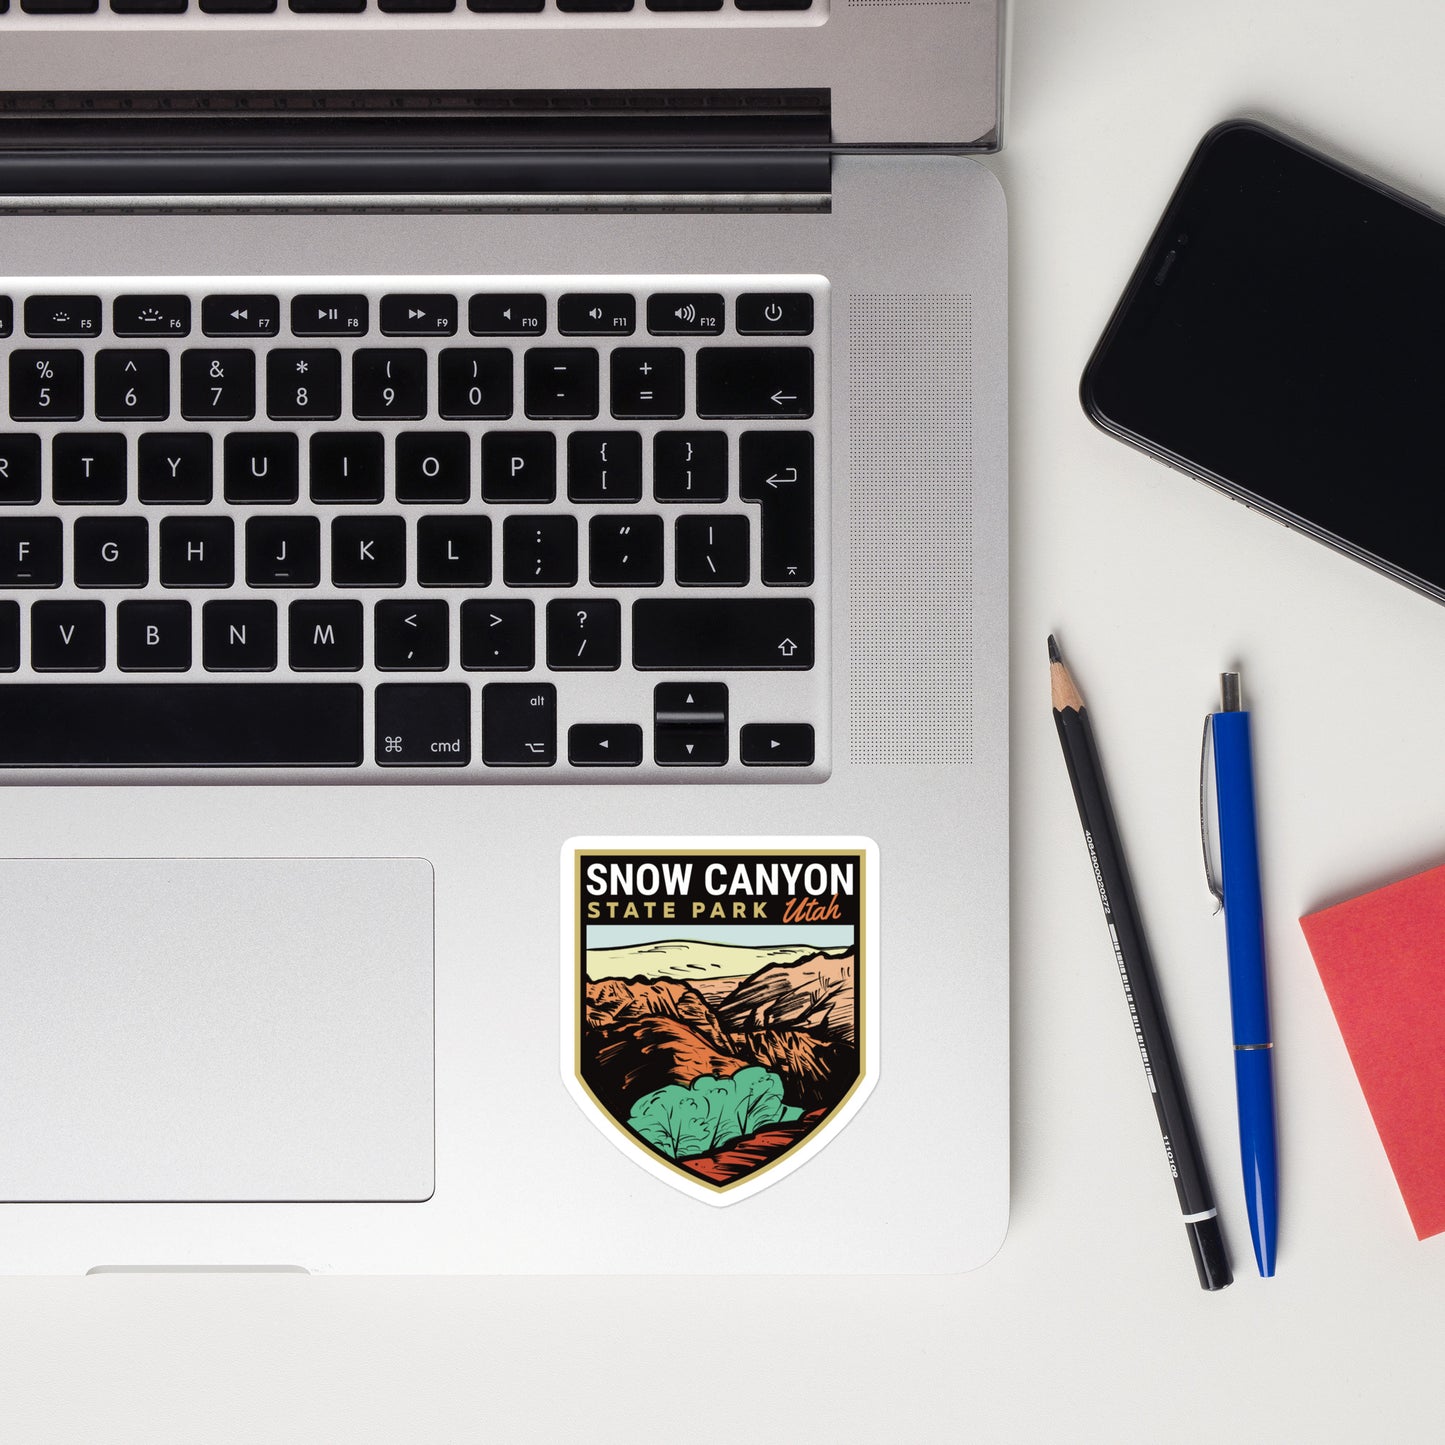 A sticker of Snow Canyon State Park on a laptop